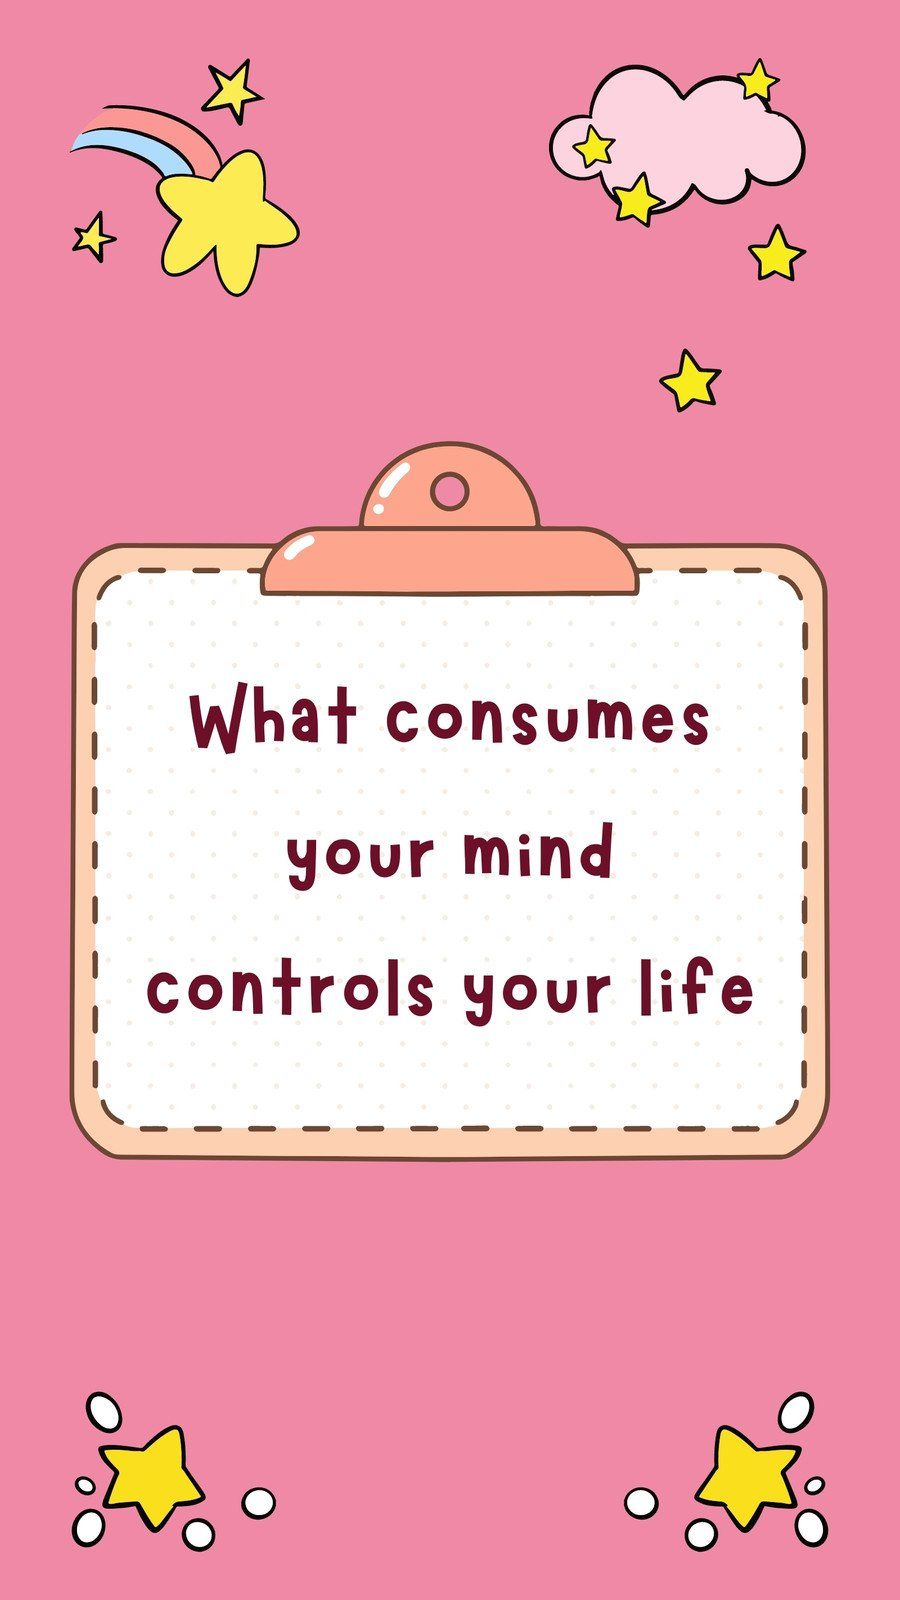 What consumes your mind controls your life - Kawaii